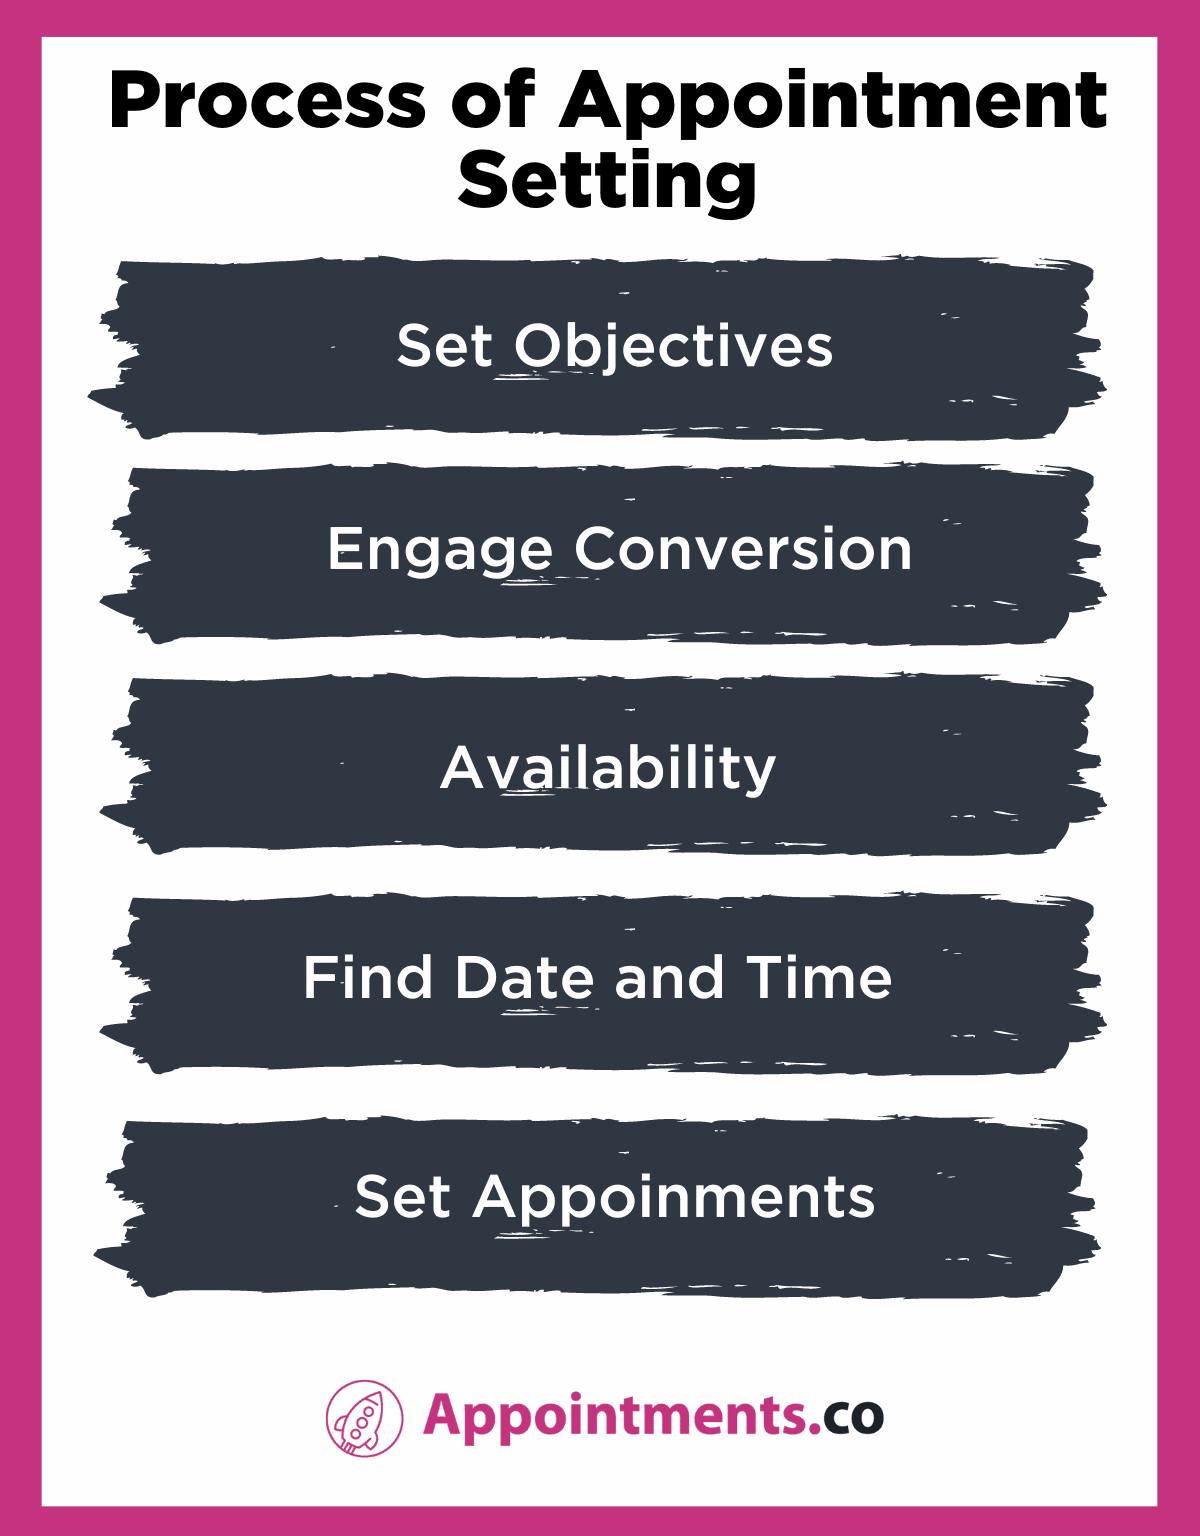 The Process of Appointment Setting